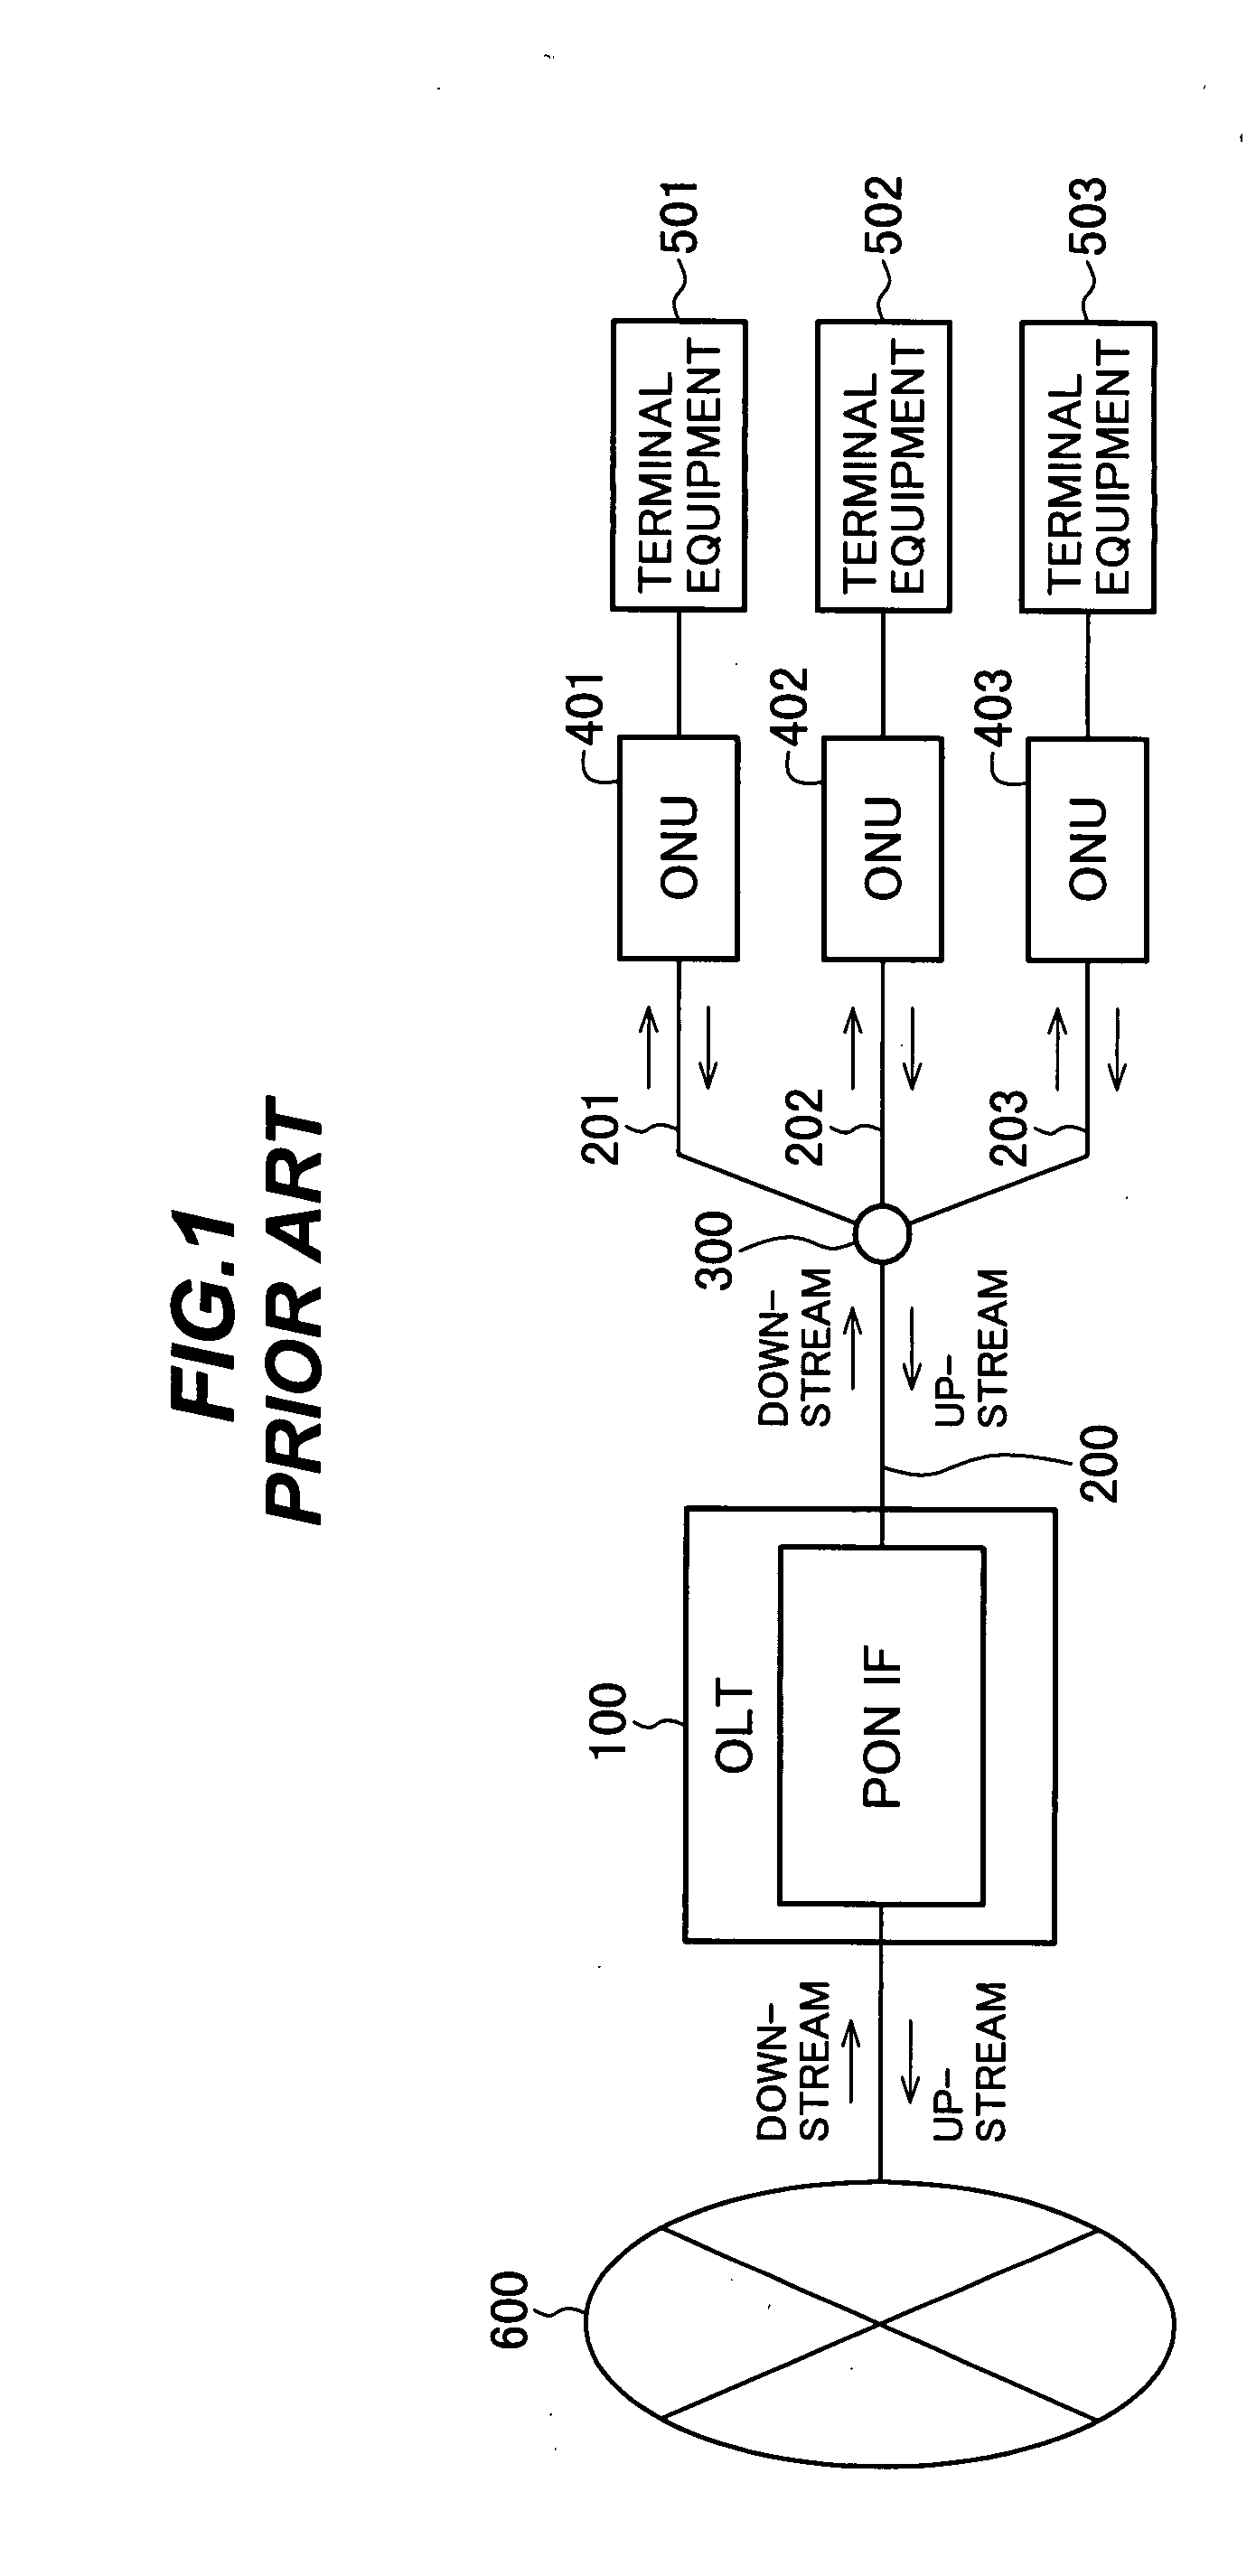 Optical communition system with N + 1 redundancy